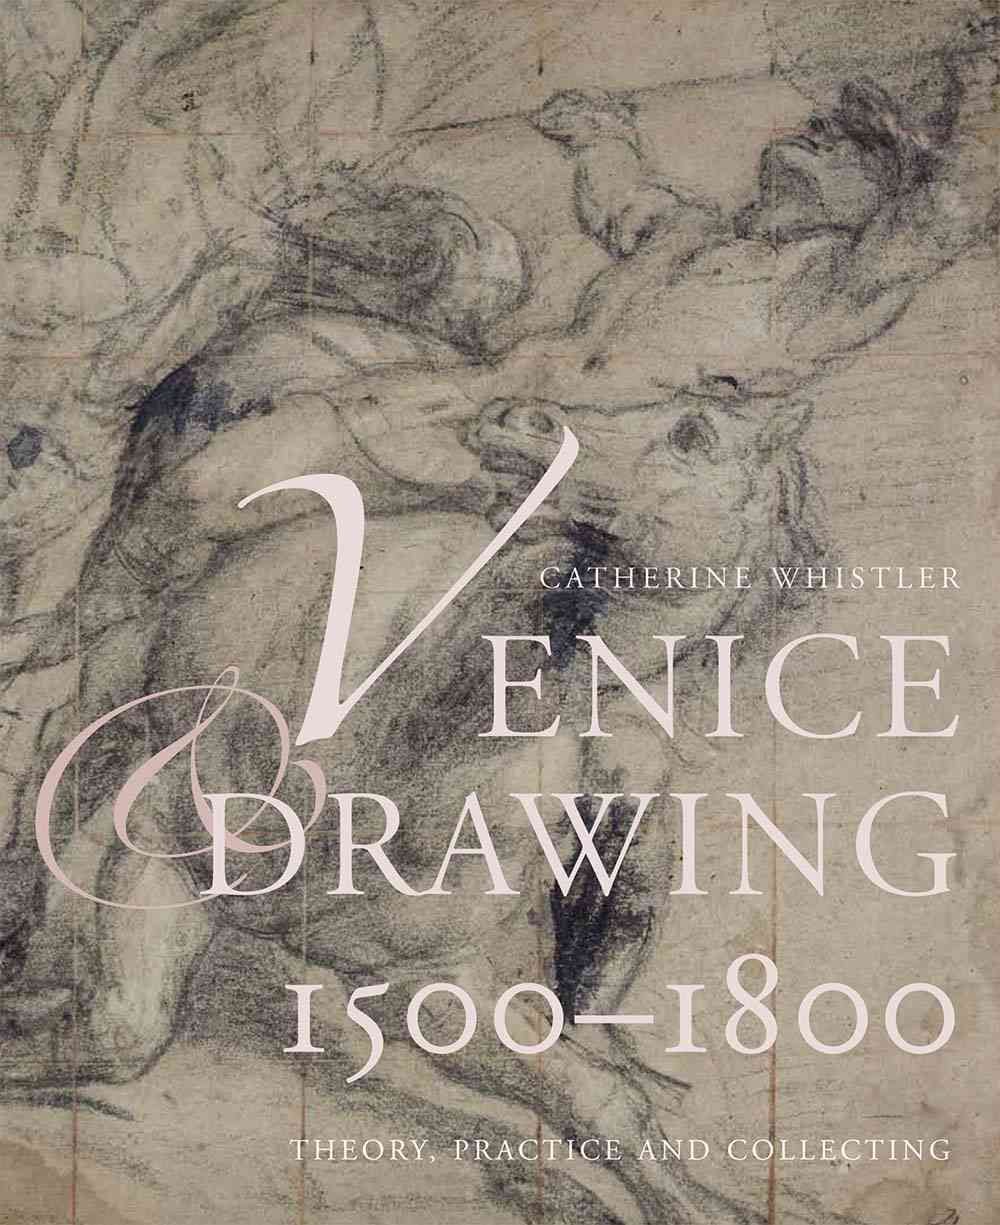 Venice and Drawing 1500-1800